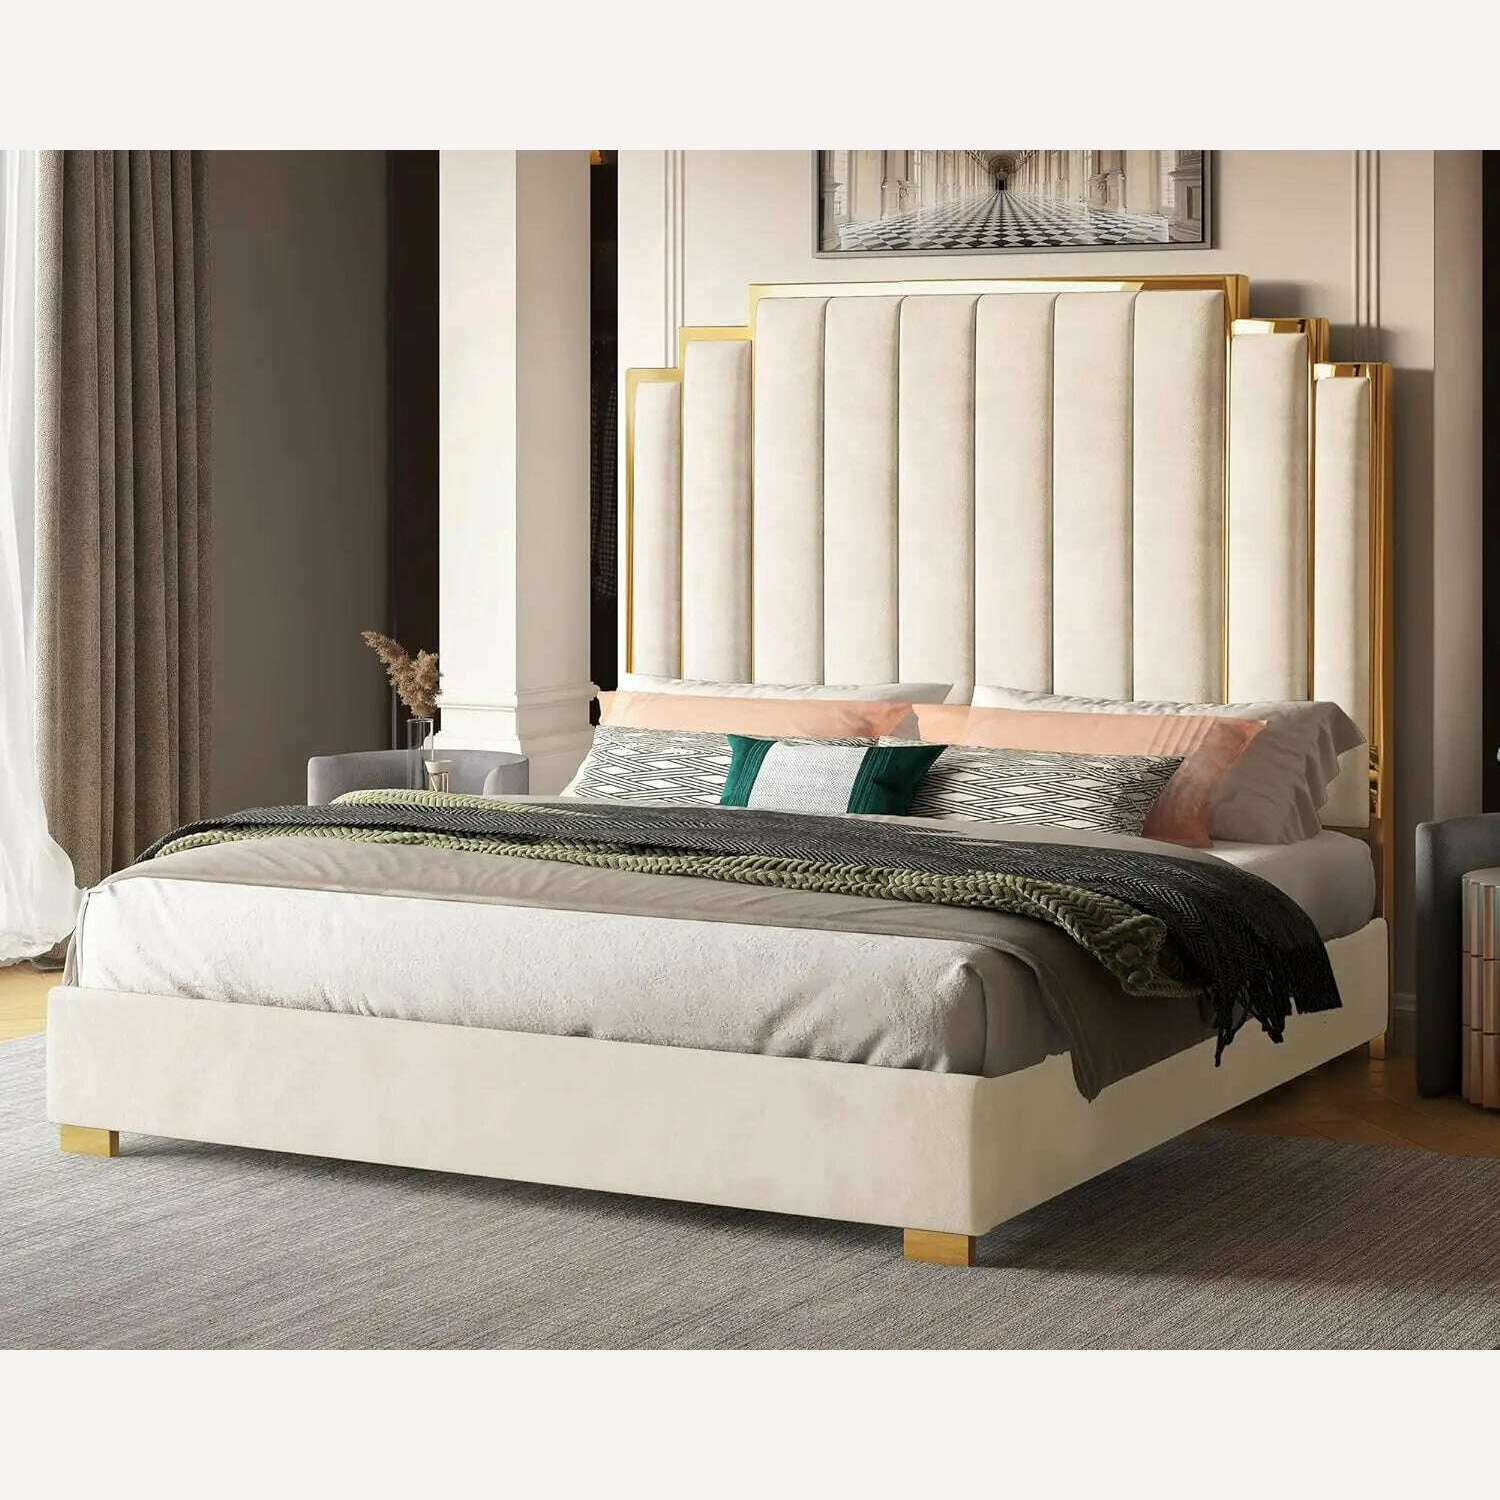 KIMLUD, Bed Frame, 61.4" Velvet Upholstered Bed with Gold Accent Headboard, Wood Slats, Queen Platform Bed, Cream / United States / King, KIMLUD Womens Clothes